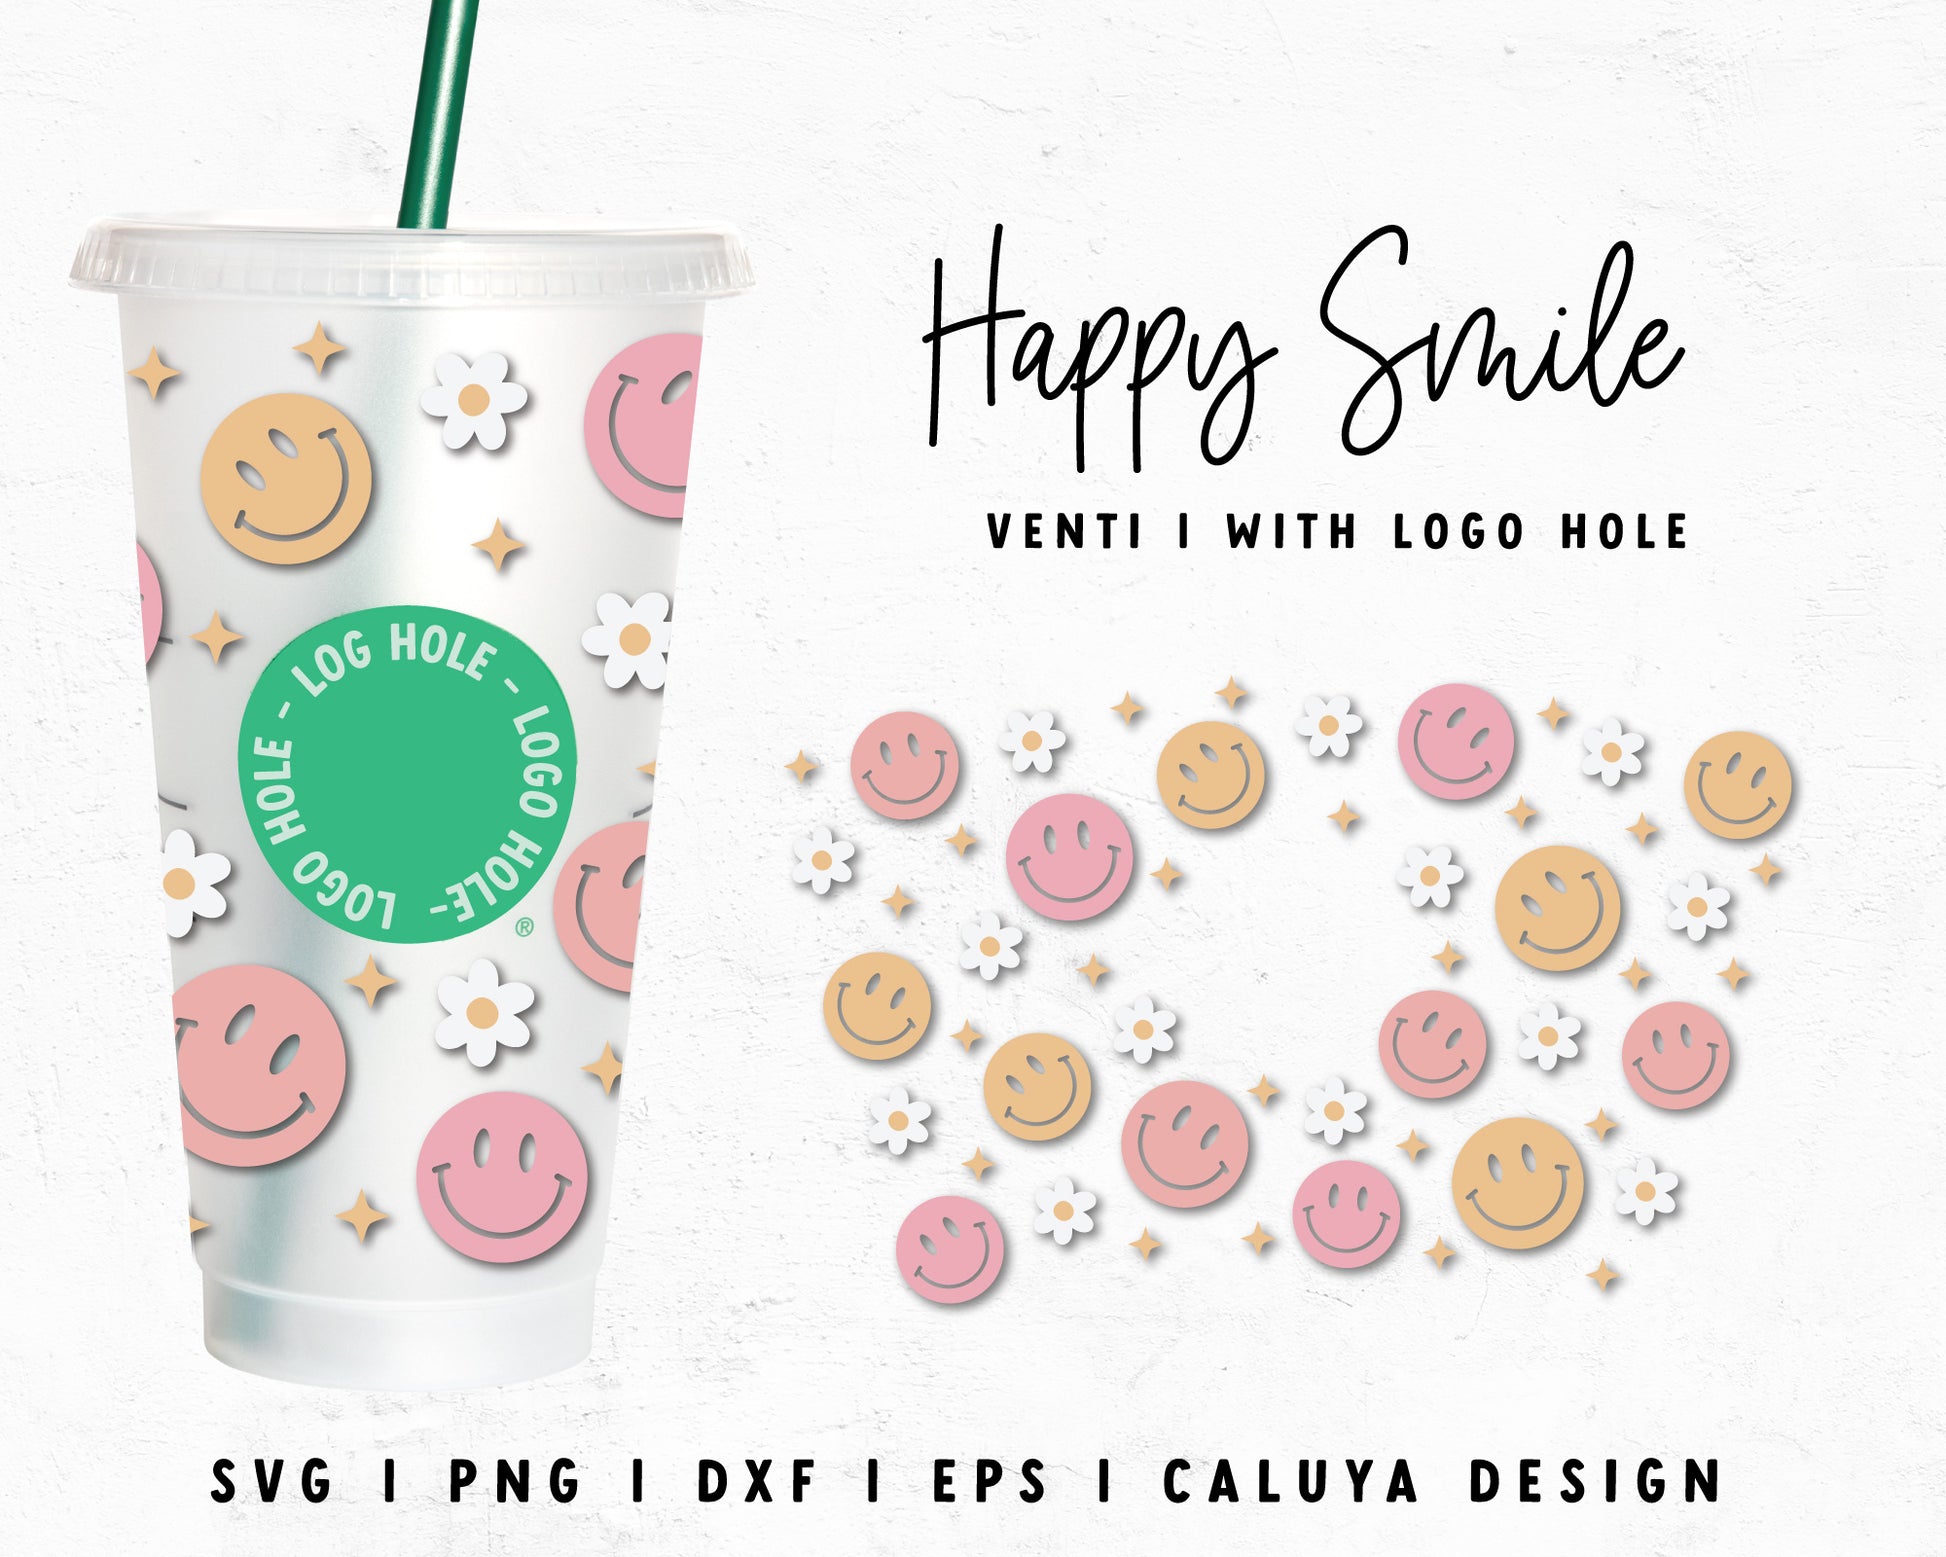 Venti Cup With Hole Happy Smile Cup Wrap Cut File for Cricut, Cameo Silhouette | Free SVG Cut File